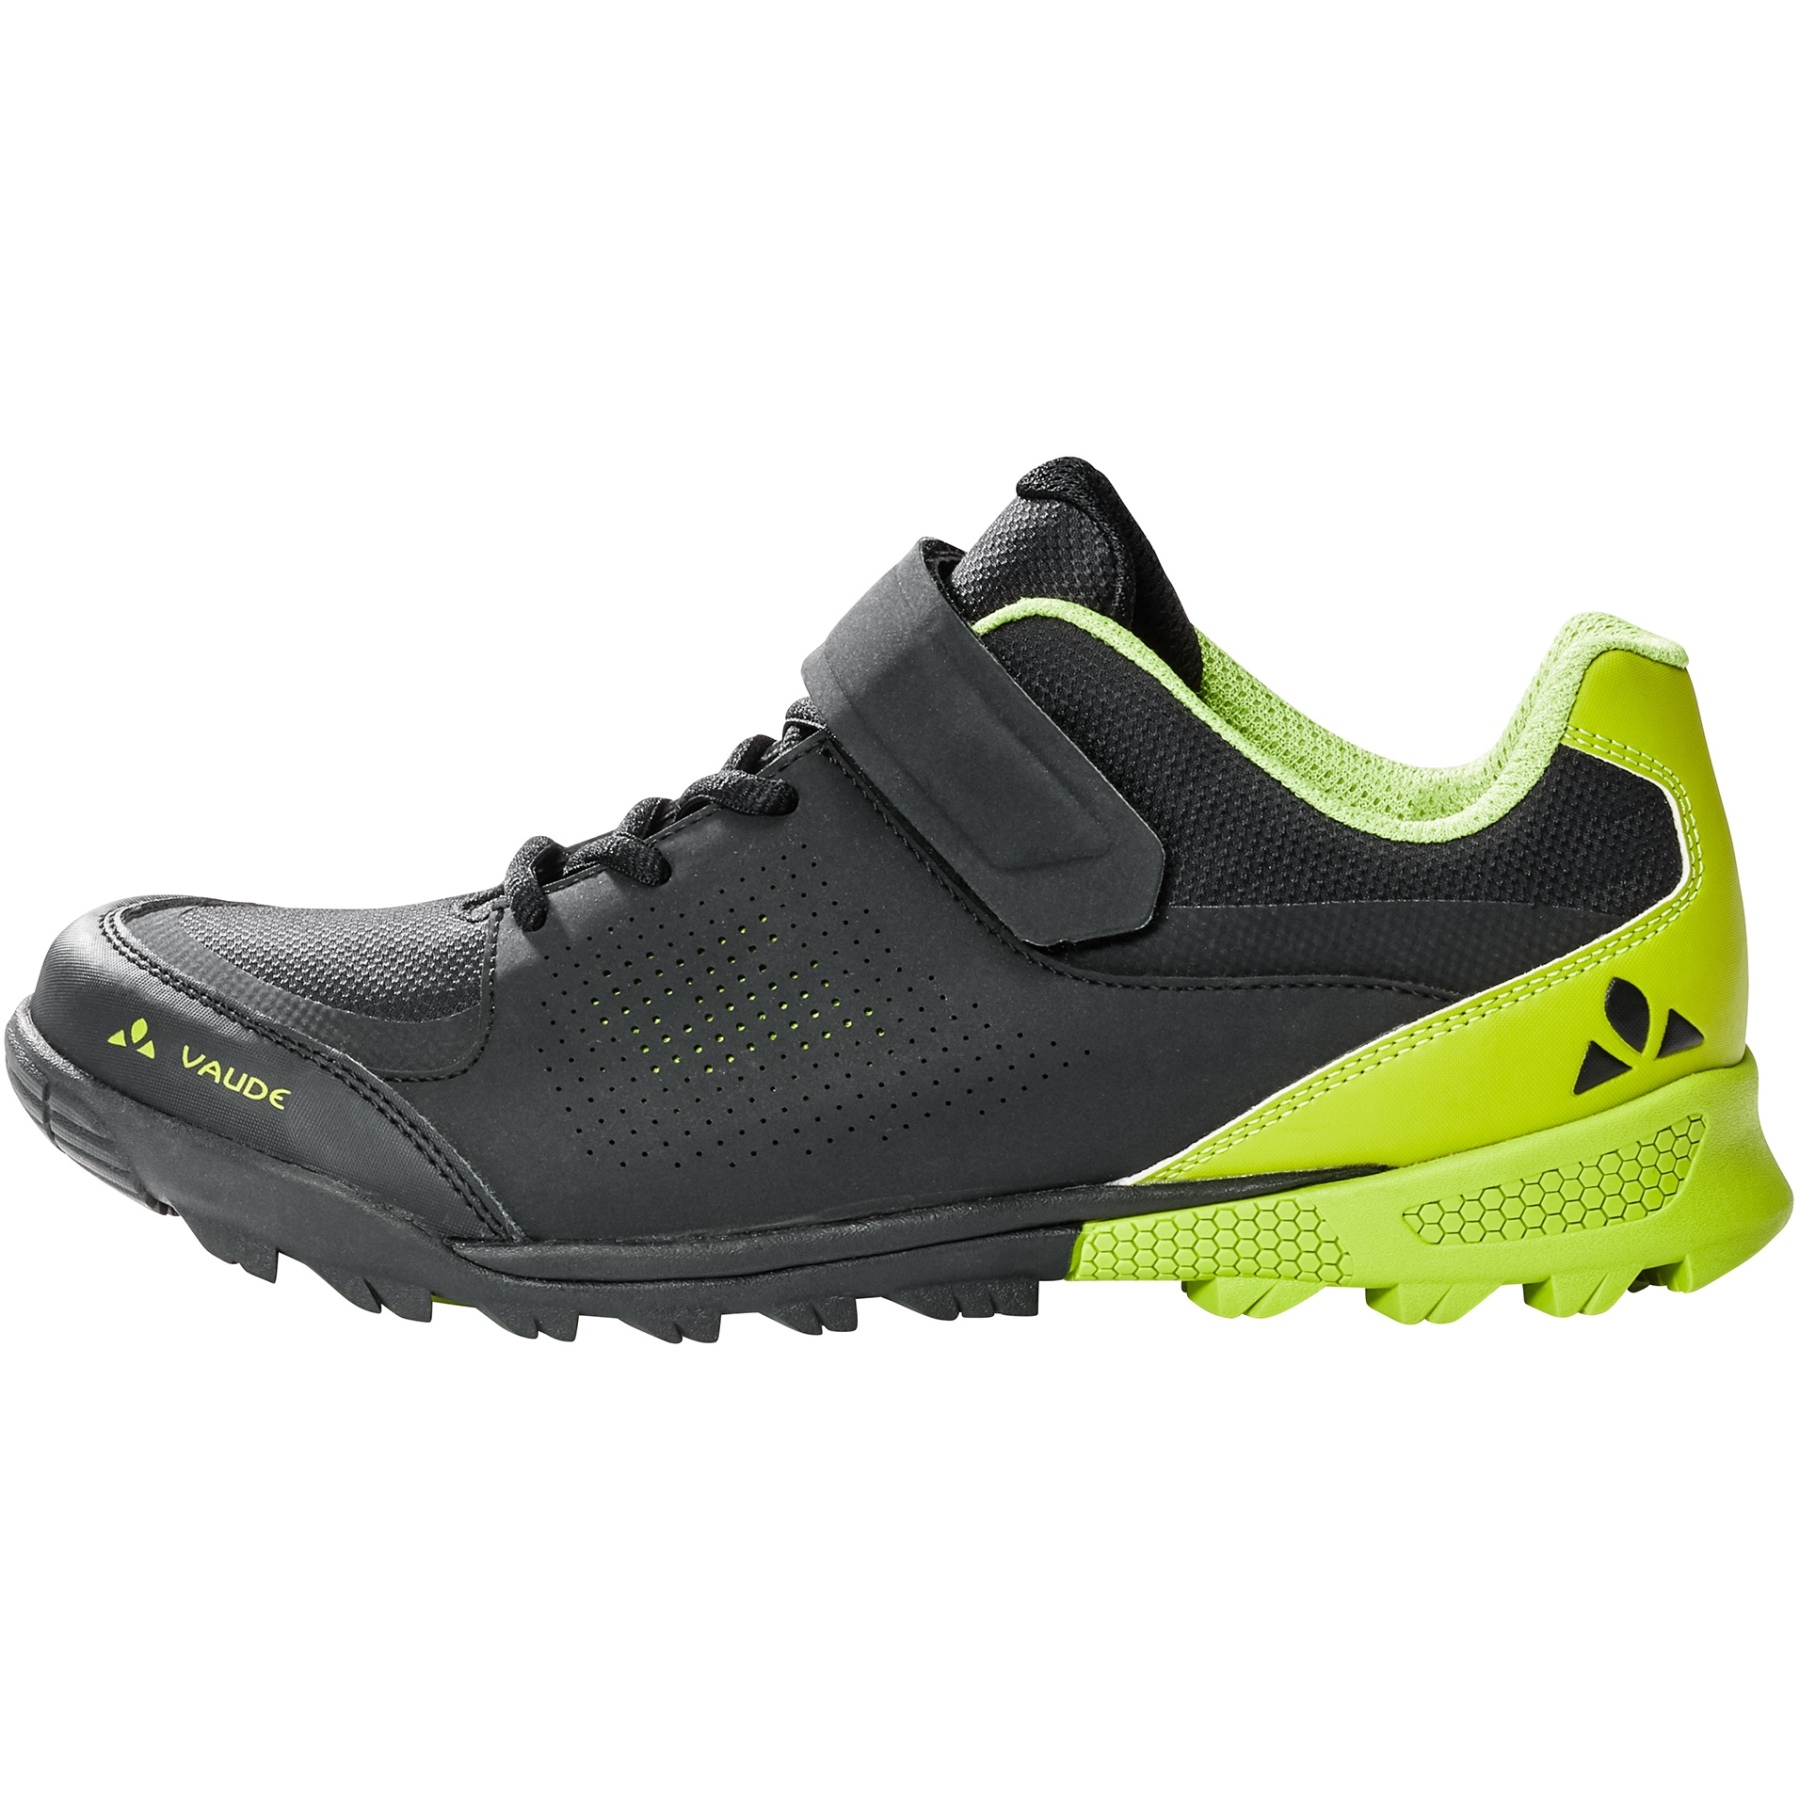 Image of Vaude AM Downieville Low All-Mountain Shoes - black/bright green